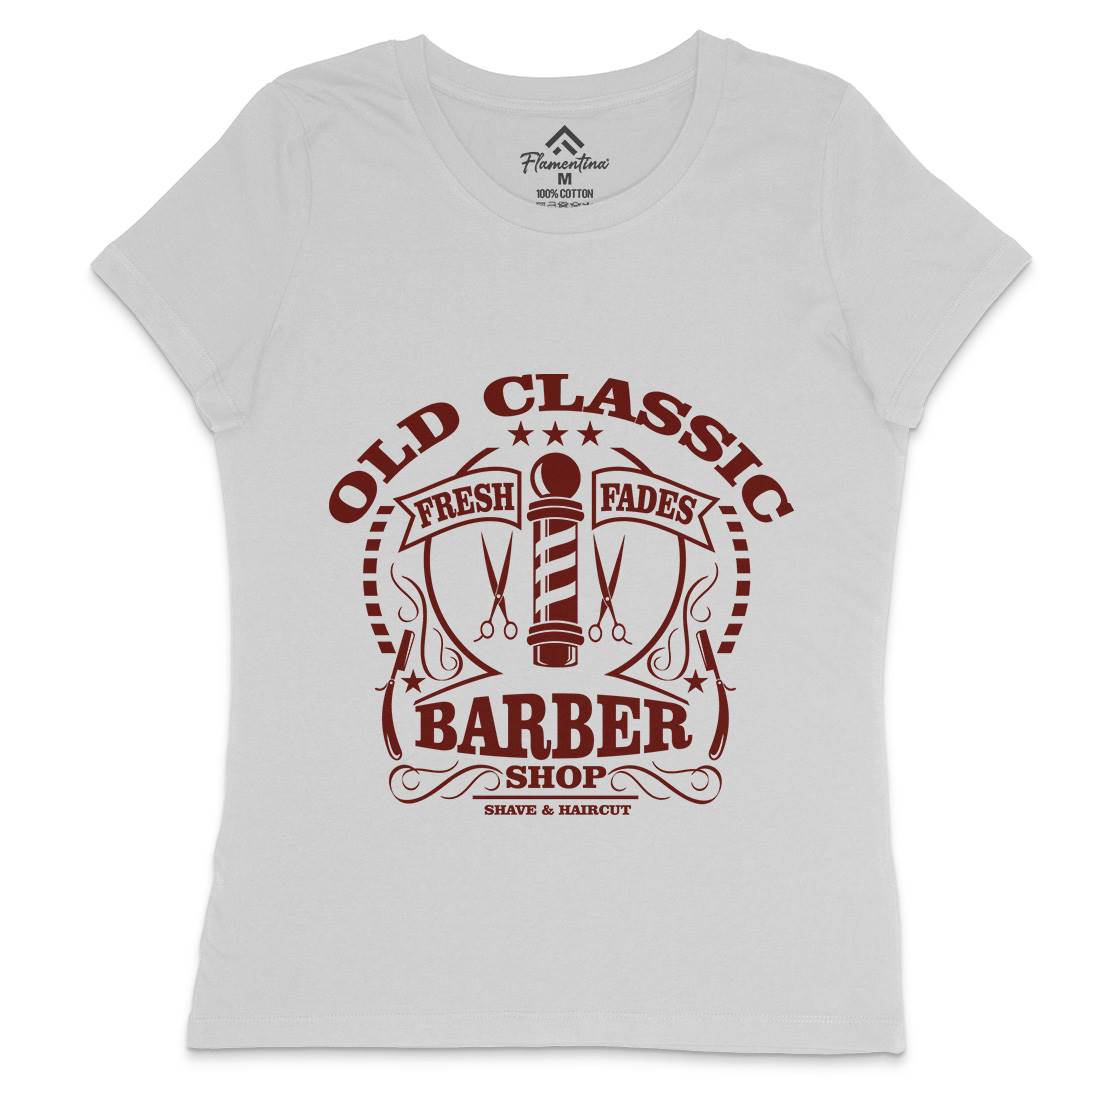 Old Classic Womens Crew Neck T-Shirt Barber A099